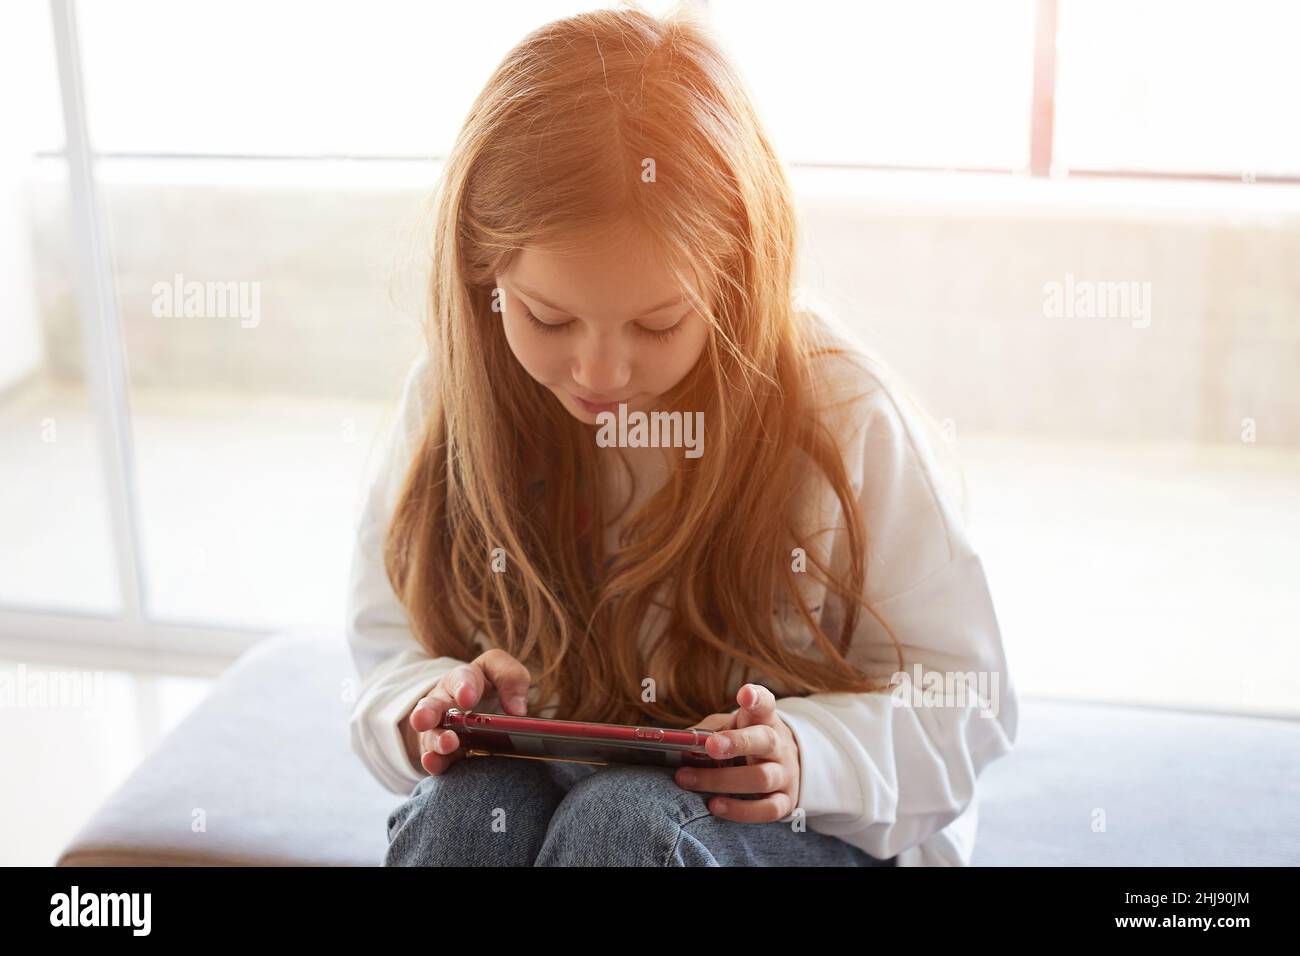 Teen girl checking social media using smartphone at home. Girl relaxing playing mobile games Stock Photo